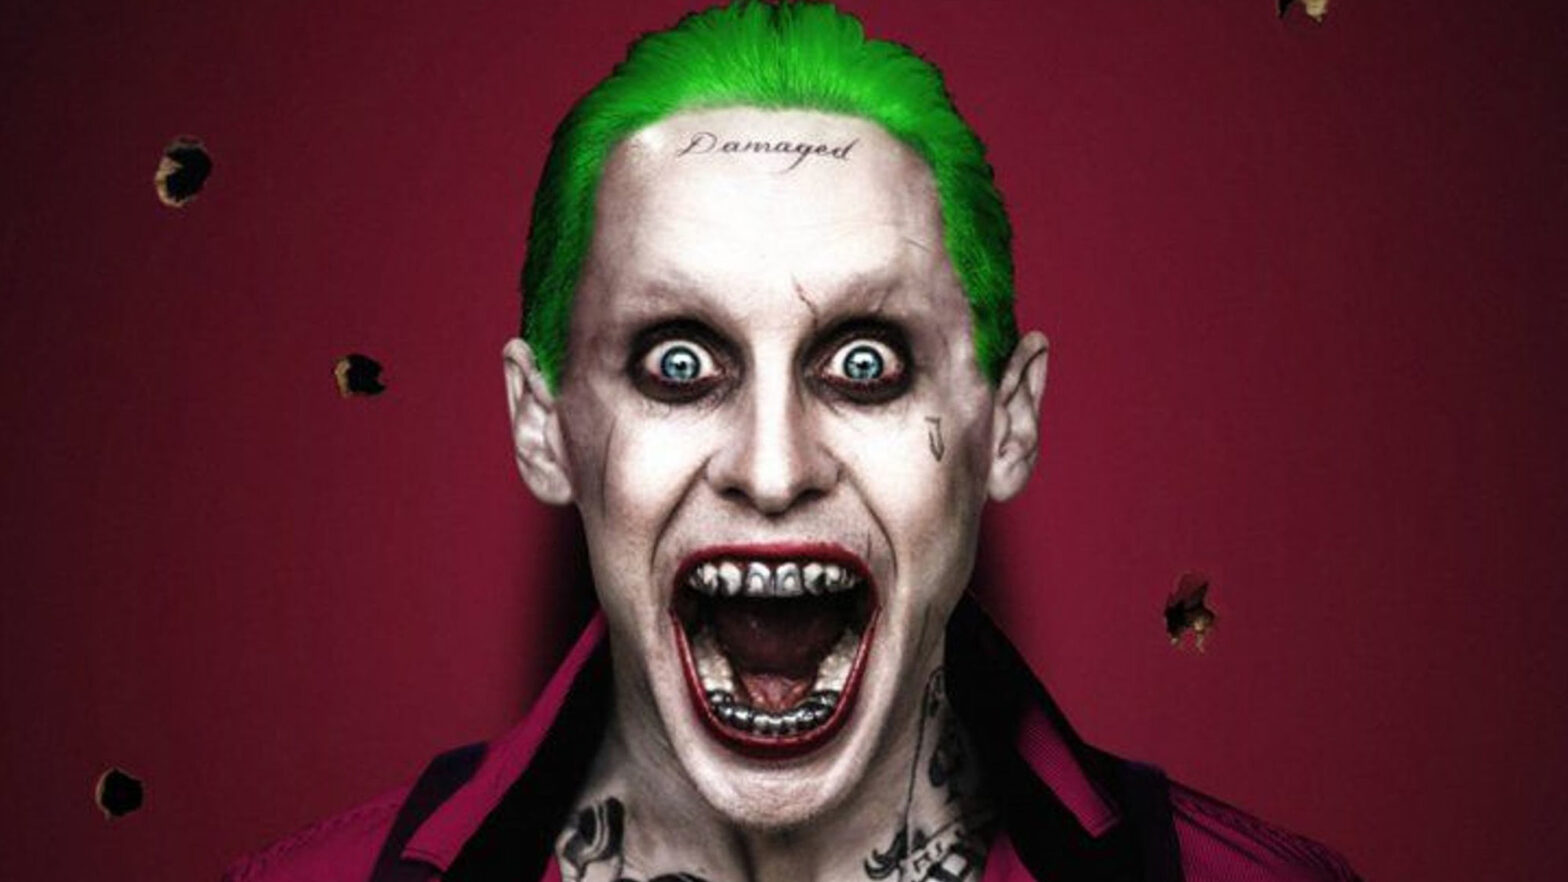 7. The Joker's blonde hair in the film "Suicide Squad" - wide 8